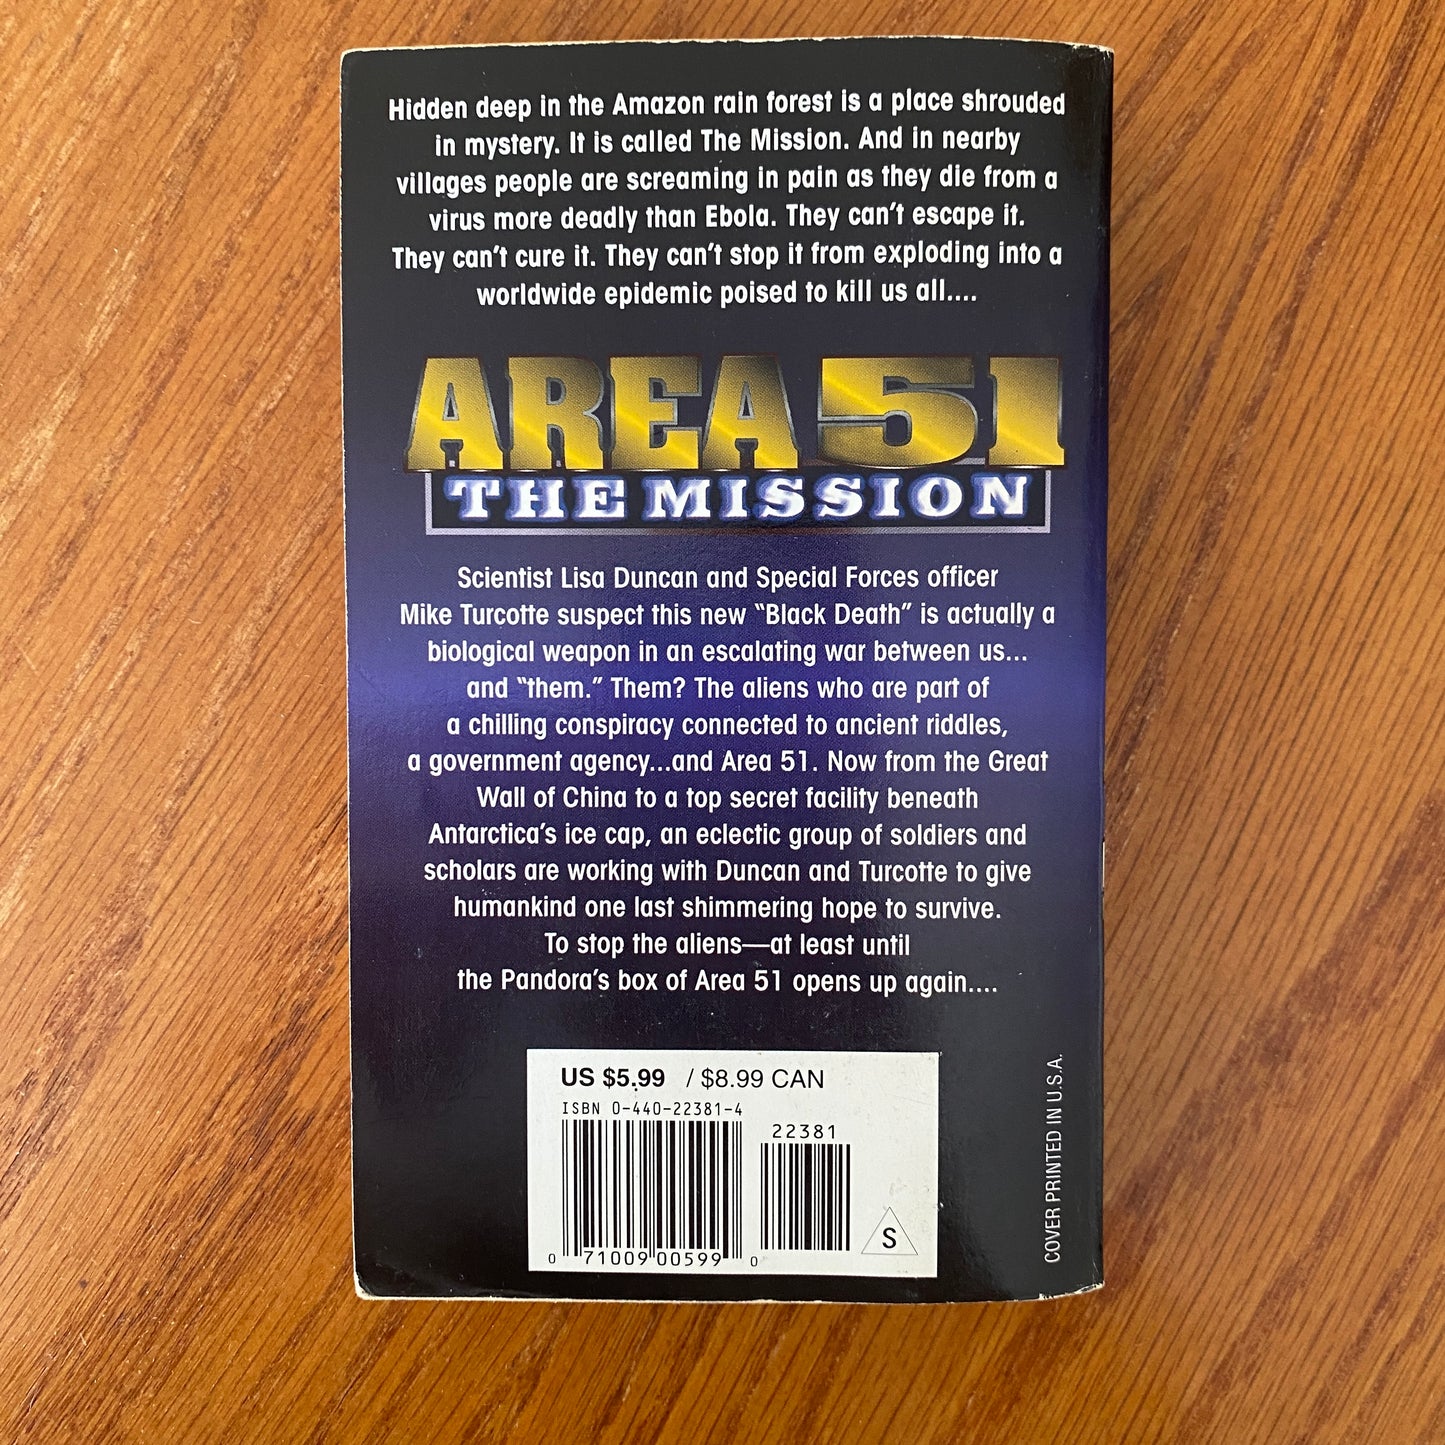 Area 51: The Mission - Robert Doherty